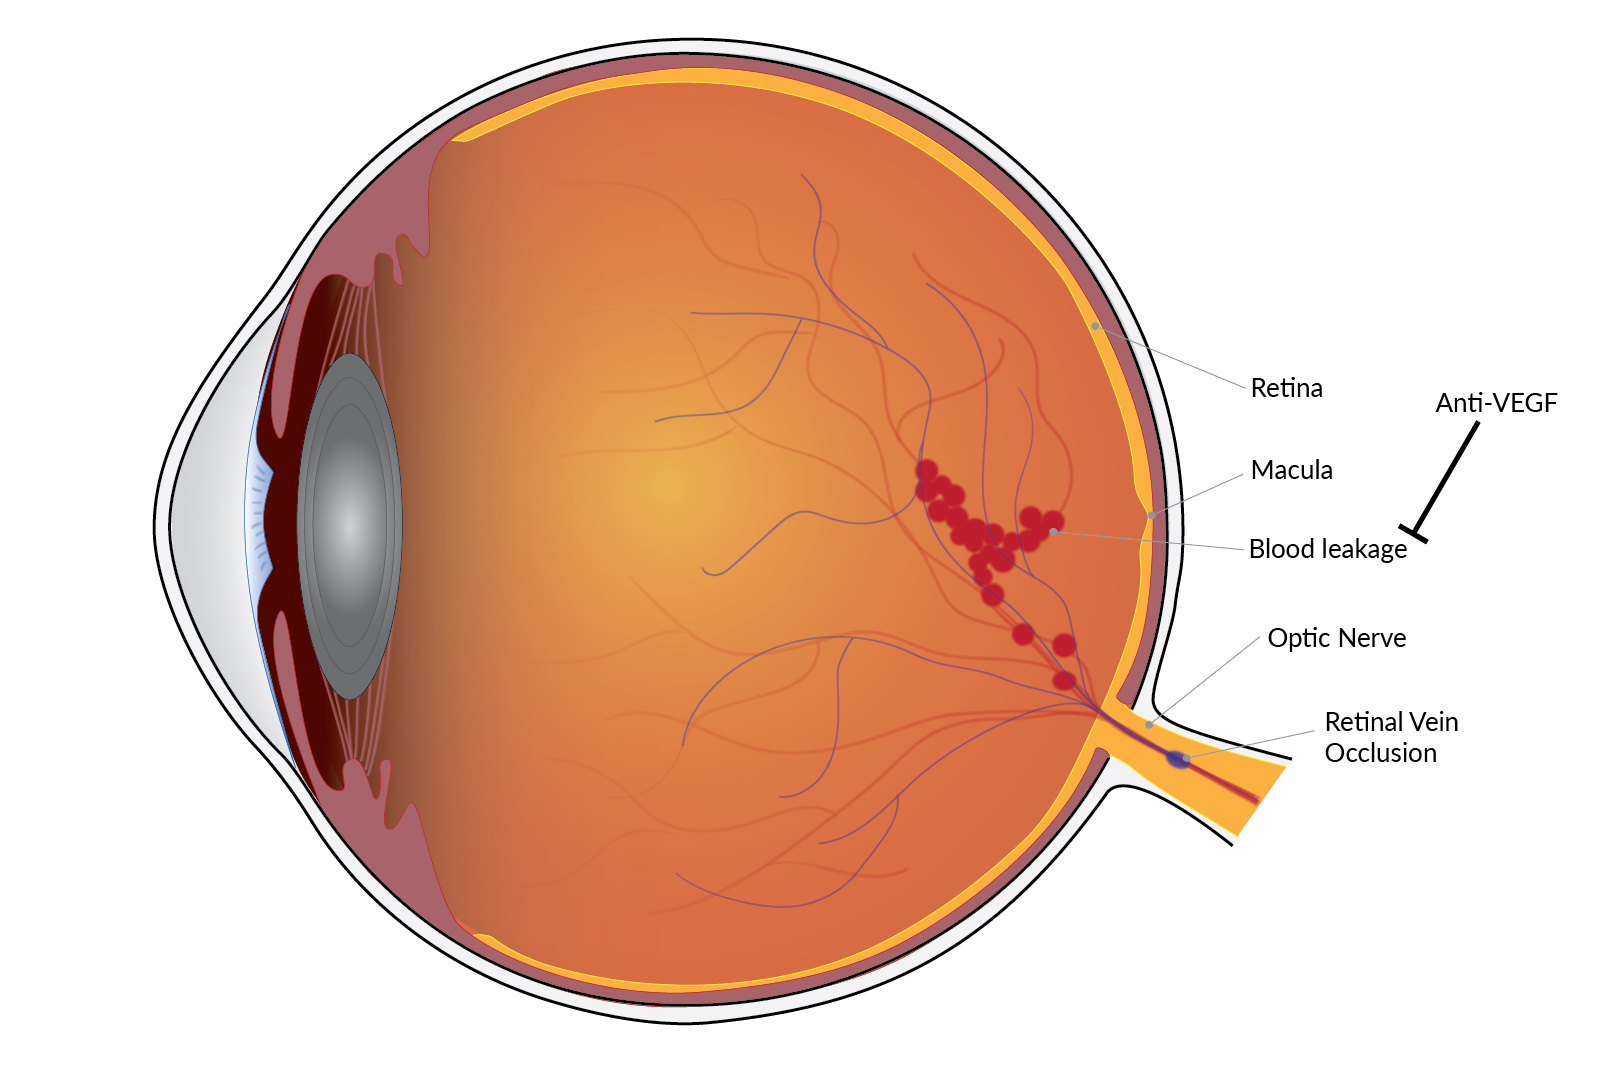 Illustration of the interior of a human eye showing a retinal vein occlusion and leakage from blood vessels.